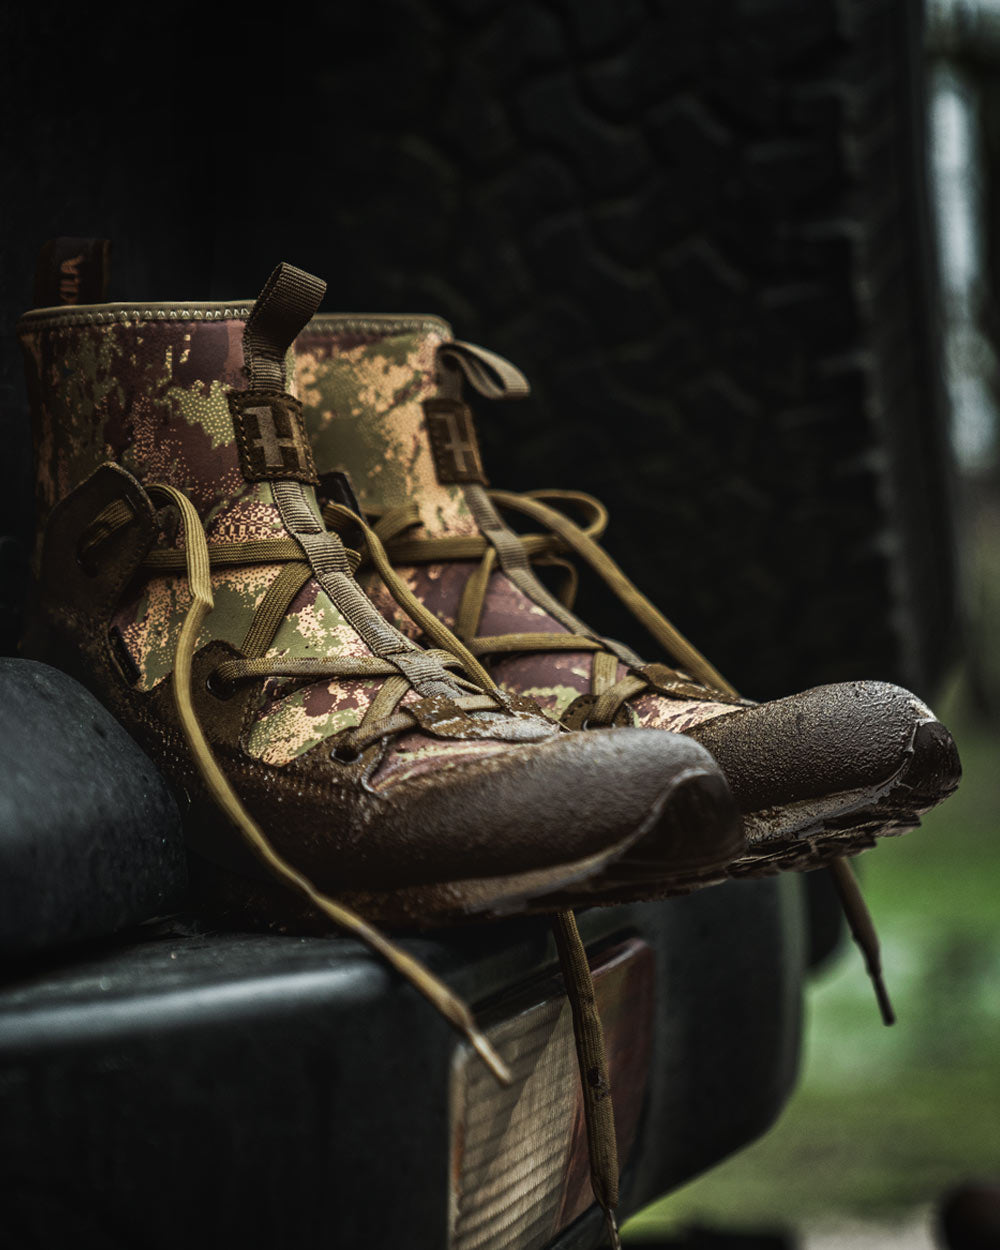 AXIS Forest coloured Harkila Stalking Sneaker GTX Boots on Truck Tail background